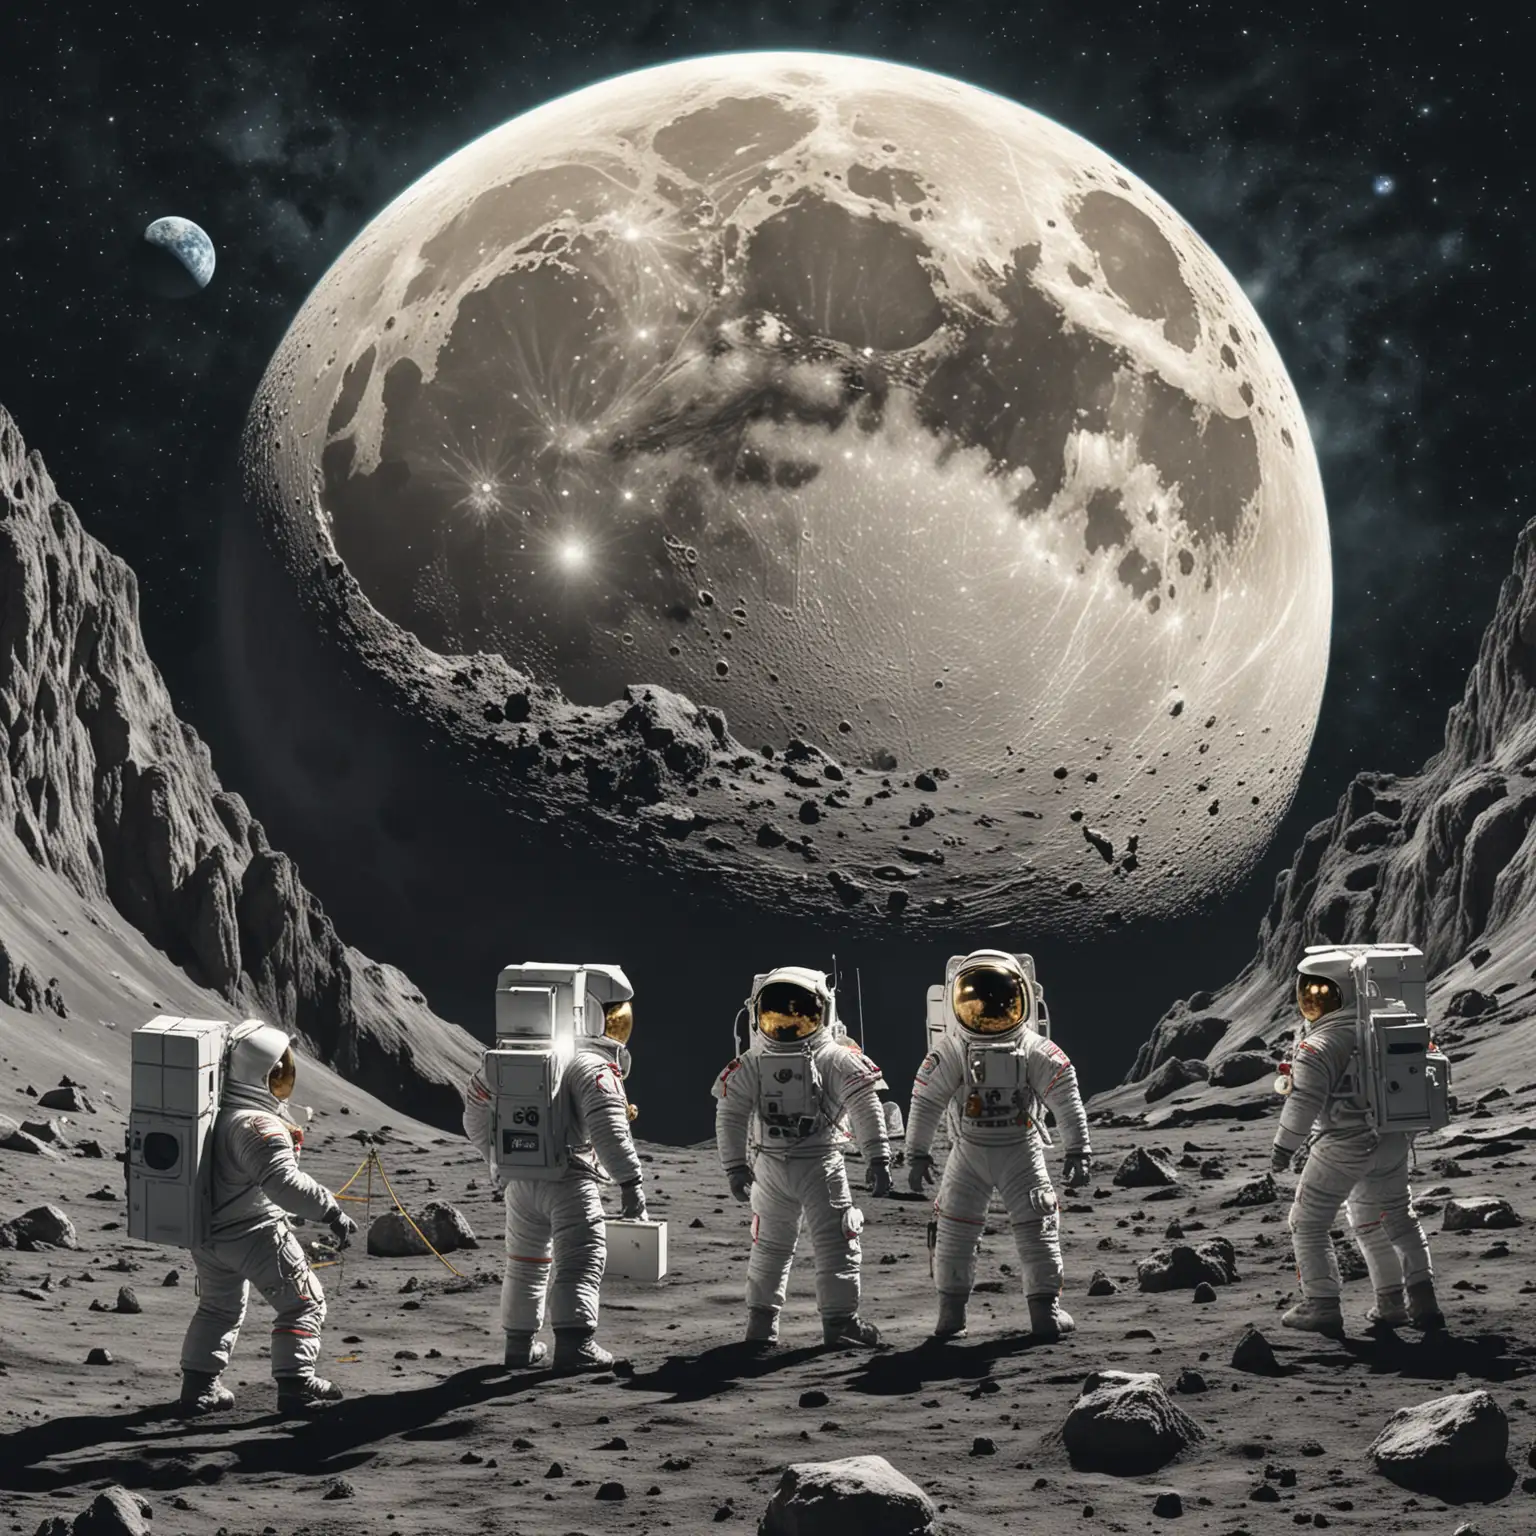 create an image that depicts a class being taught on the moon in outerspace